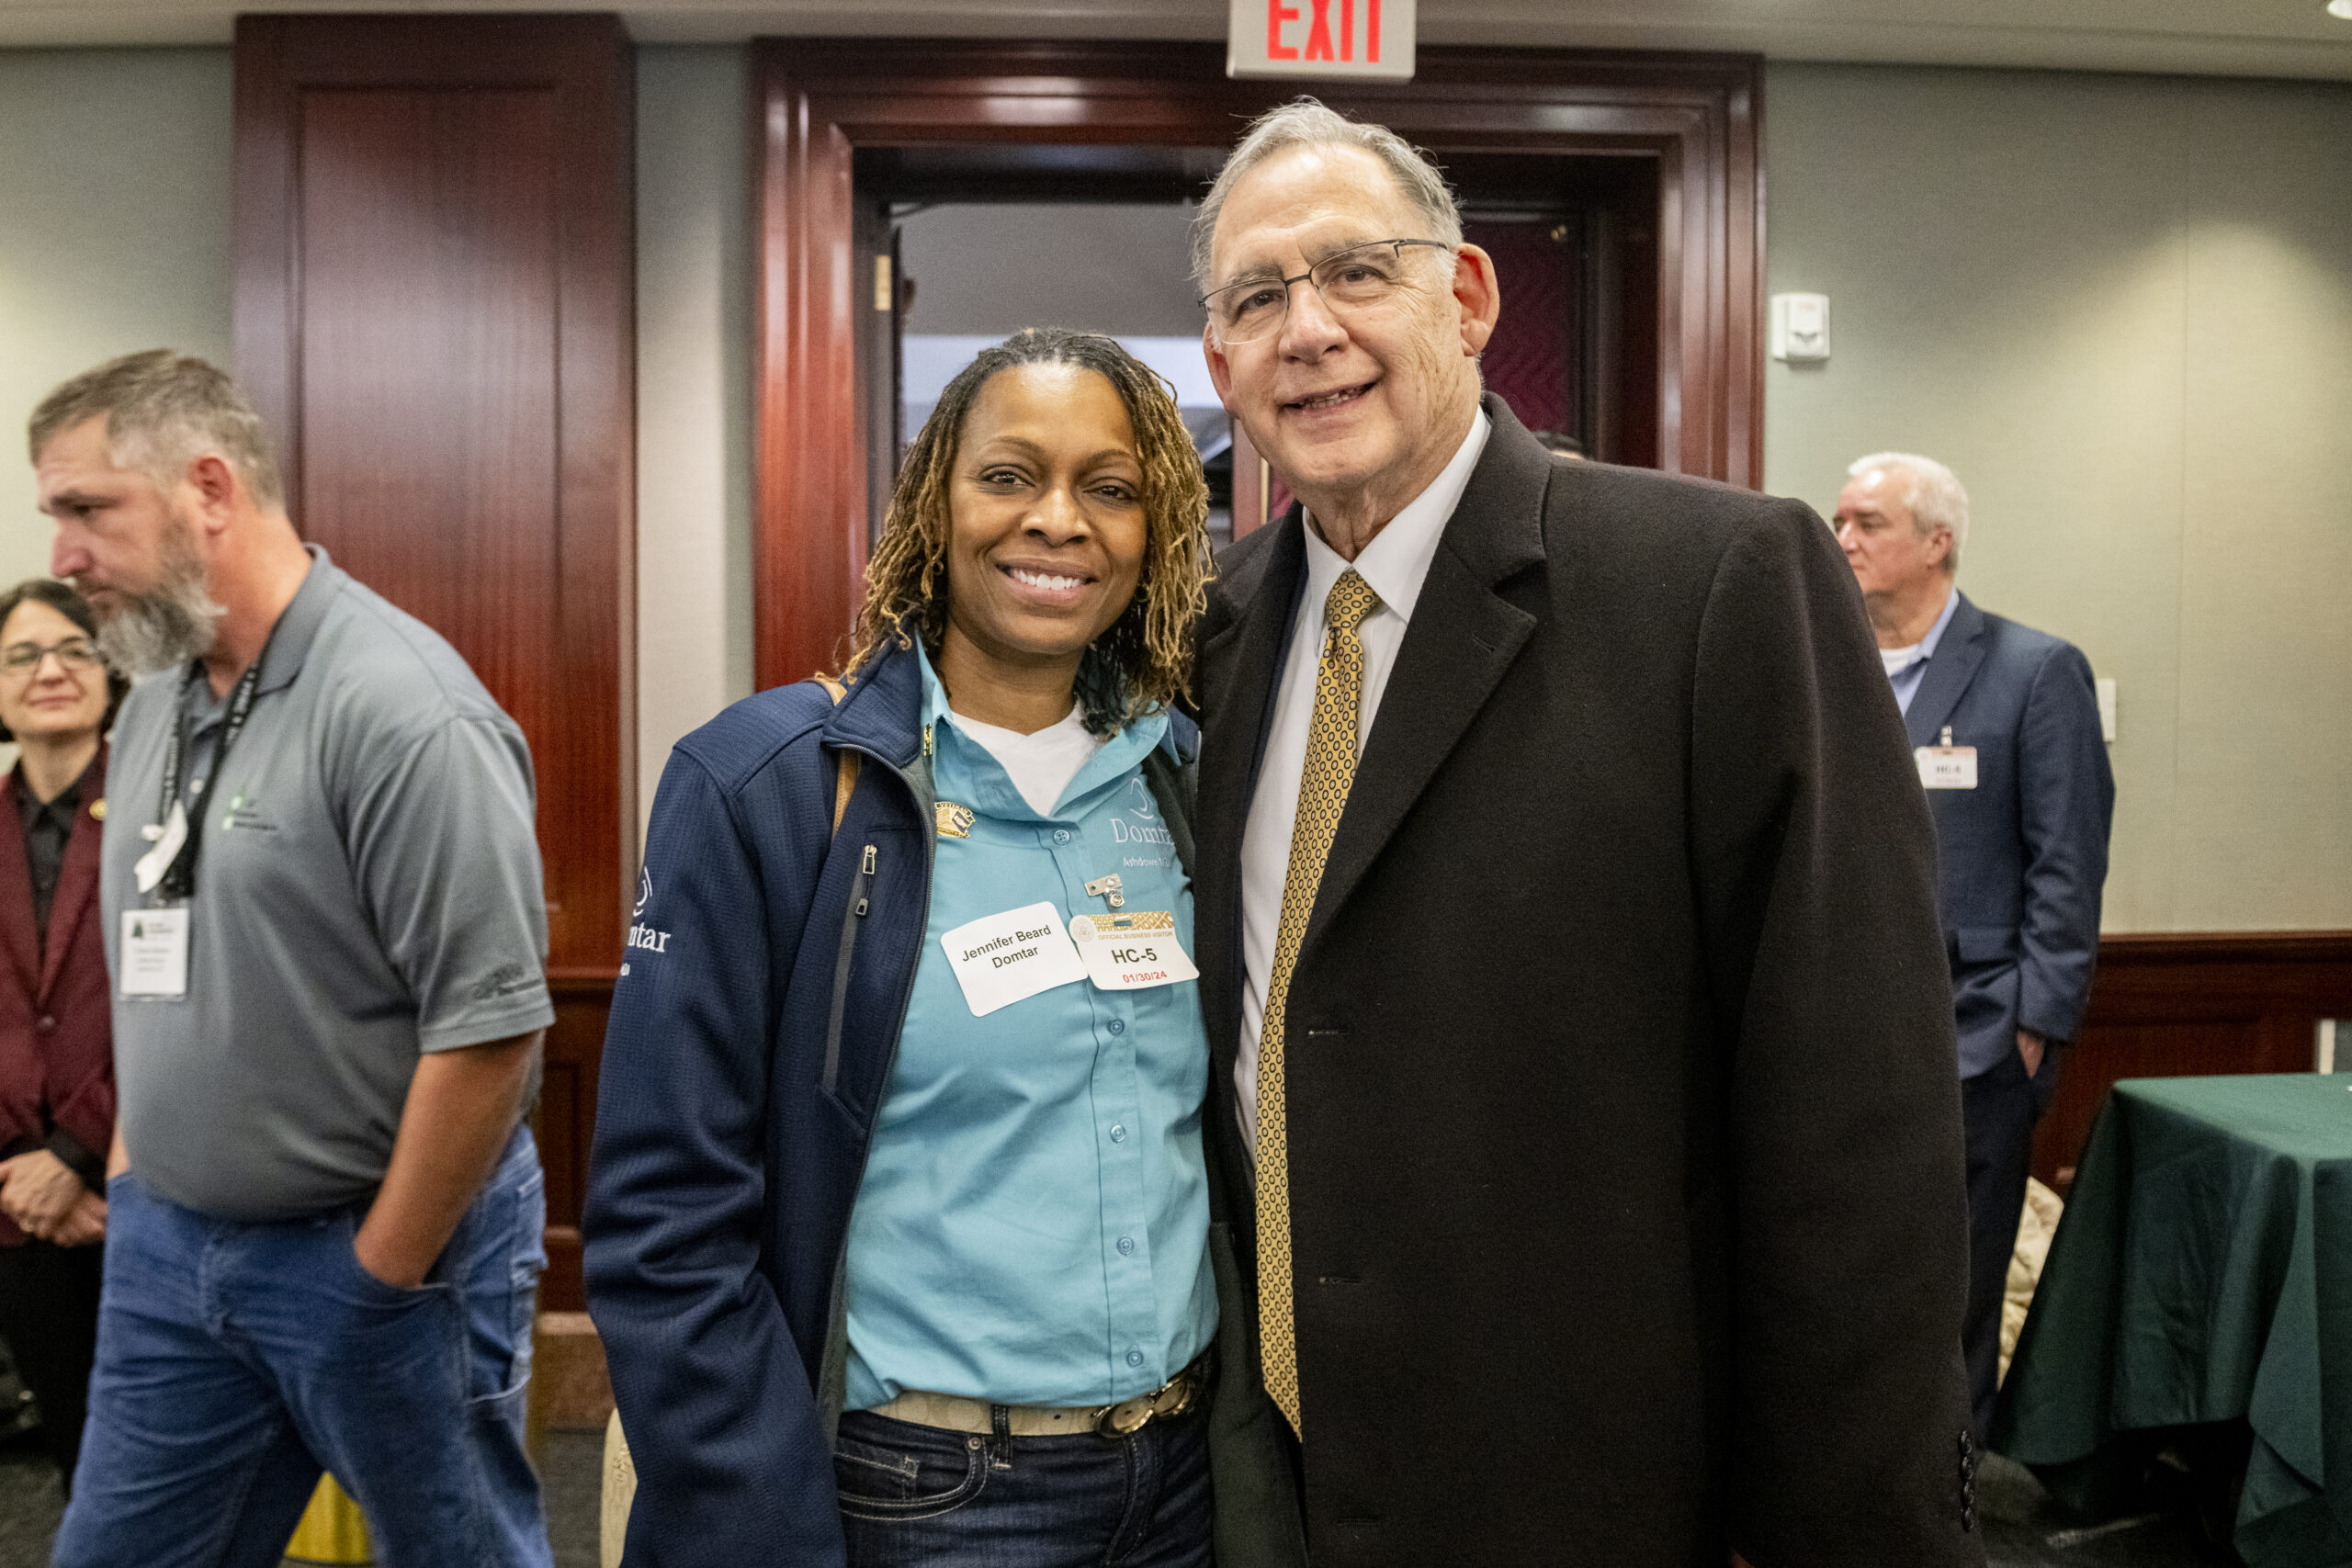 Industry advocates like Ashdown Mill employee Jennifer Beard met with lawmakers, including Senator John Boozman. Image description: Jennifer Beard, an Ashdown Mill employee (on the left), is pictured with Senator John Boozman on the right. They are in a room with other people in the background